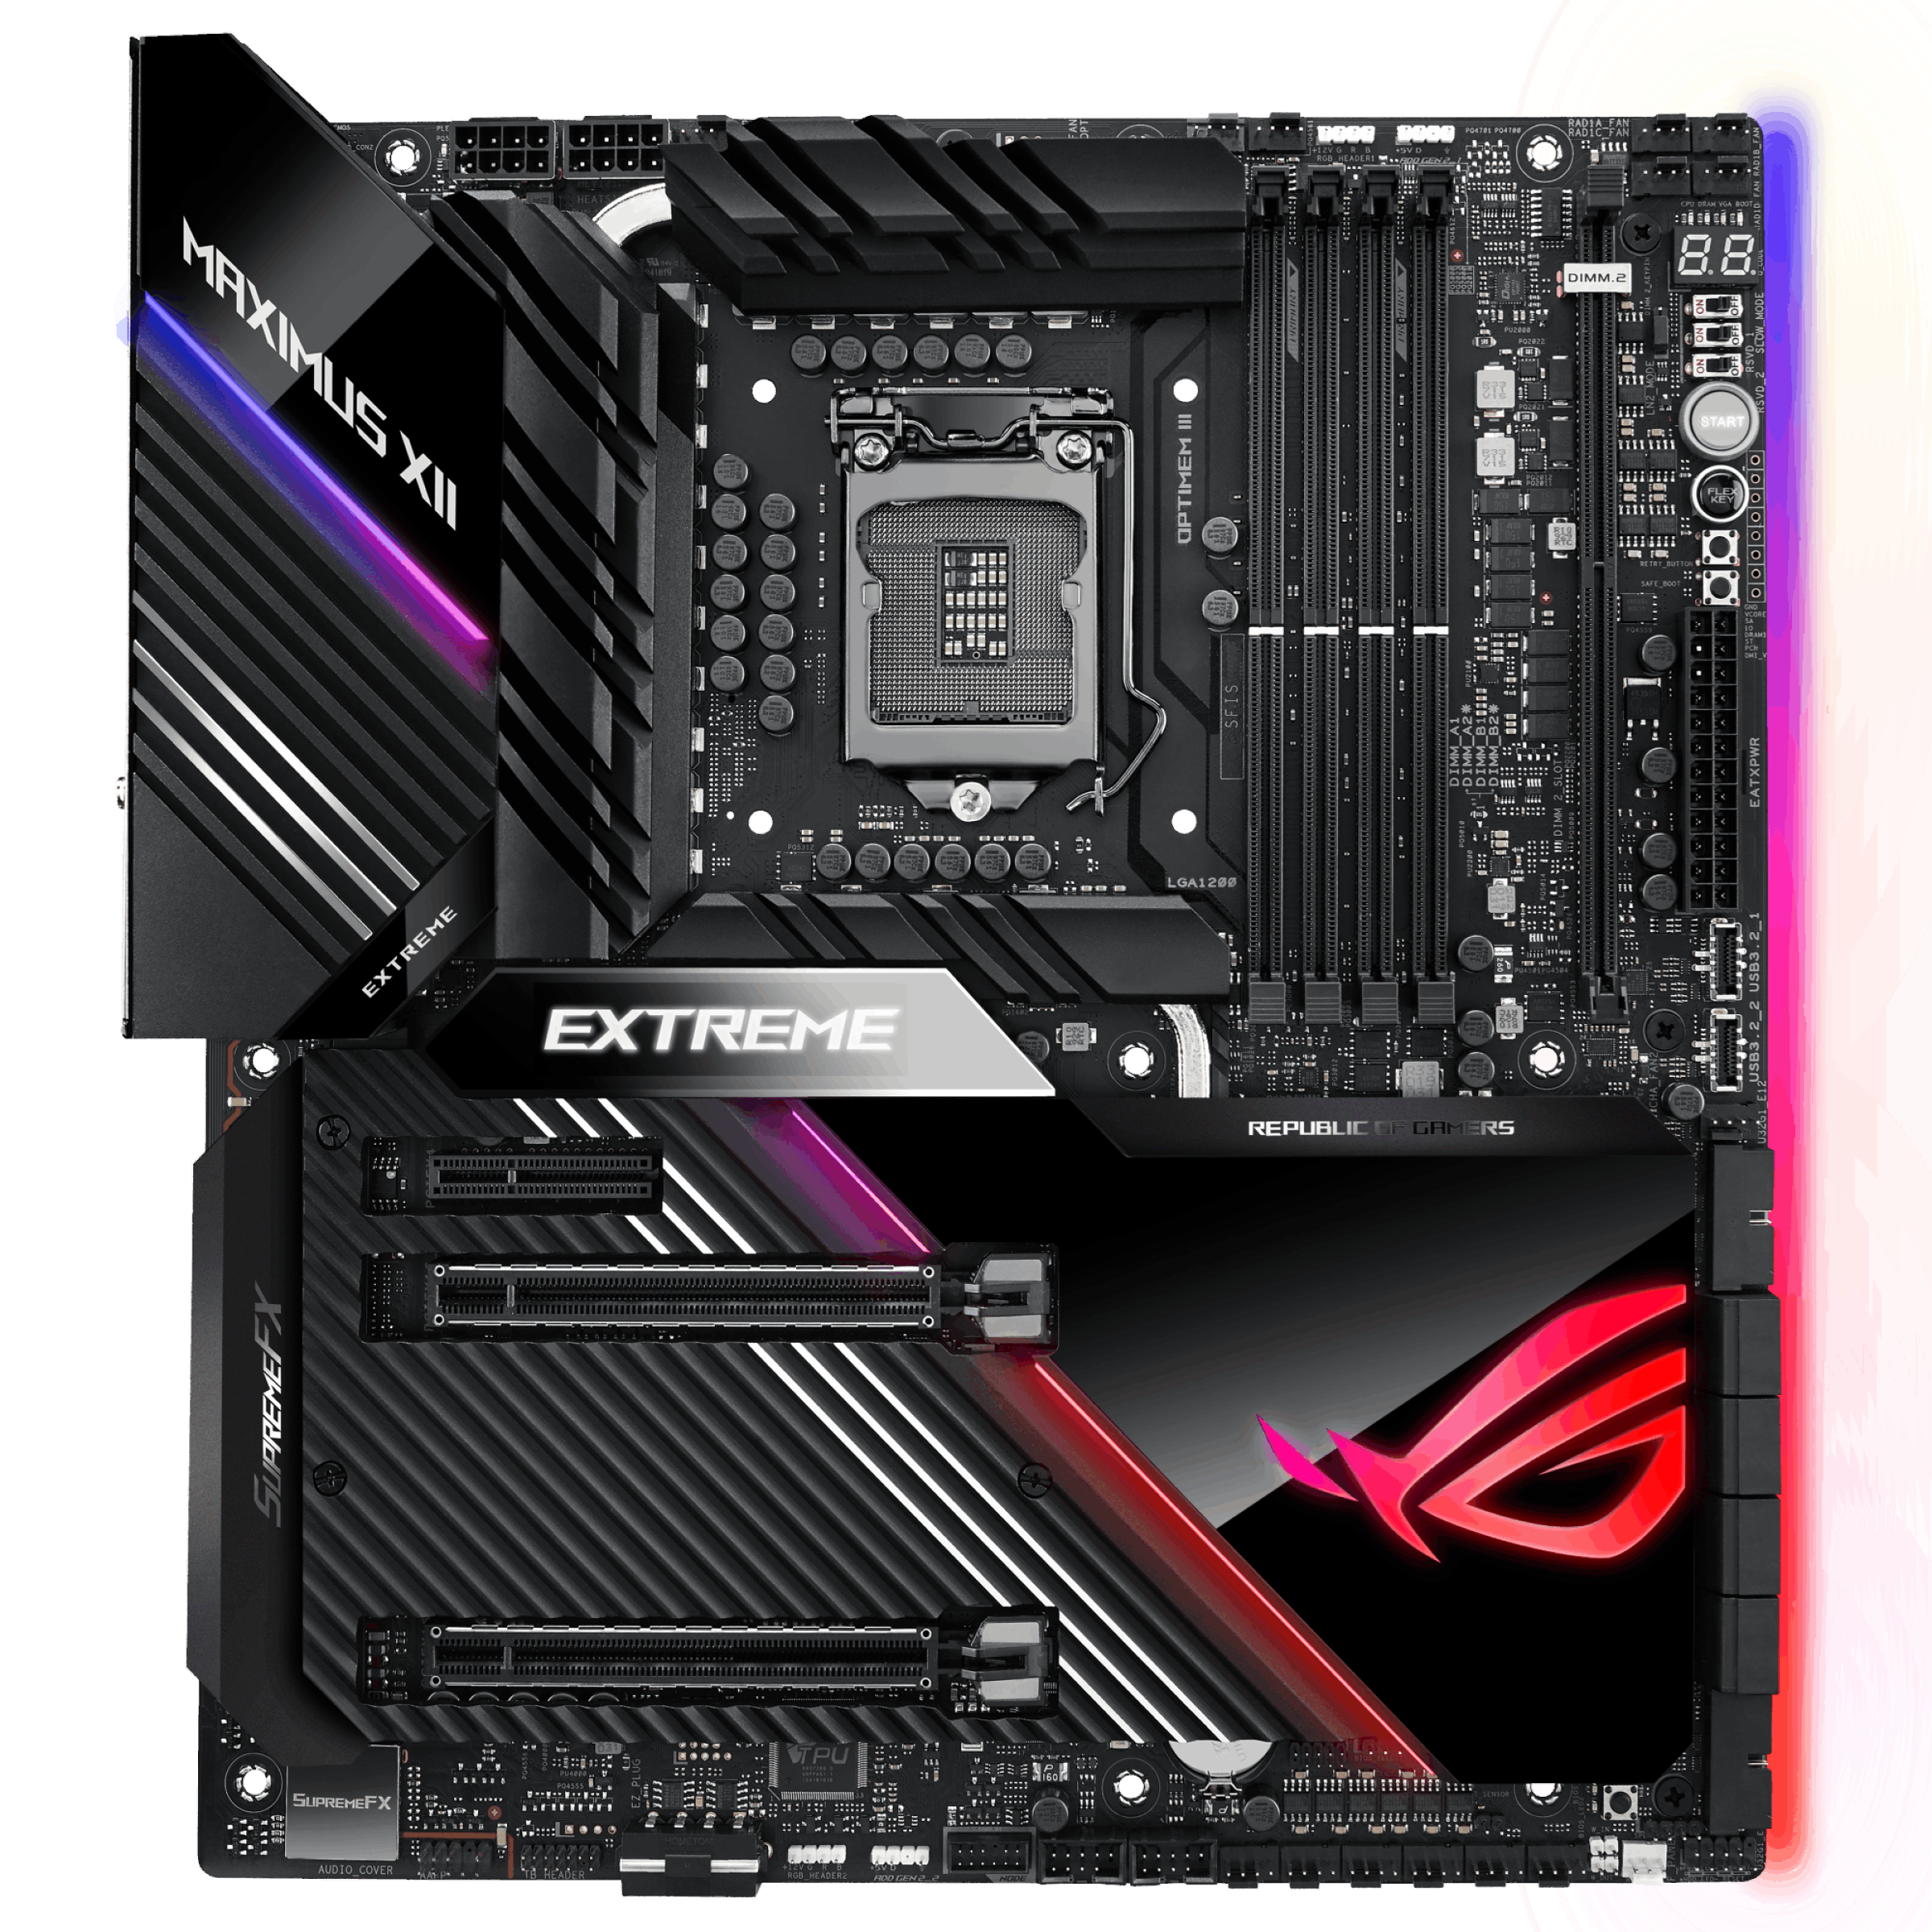 ASUS Republic of Gamers (ROG) Motherboards｜Motherboards｜ASUS USA